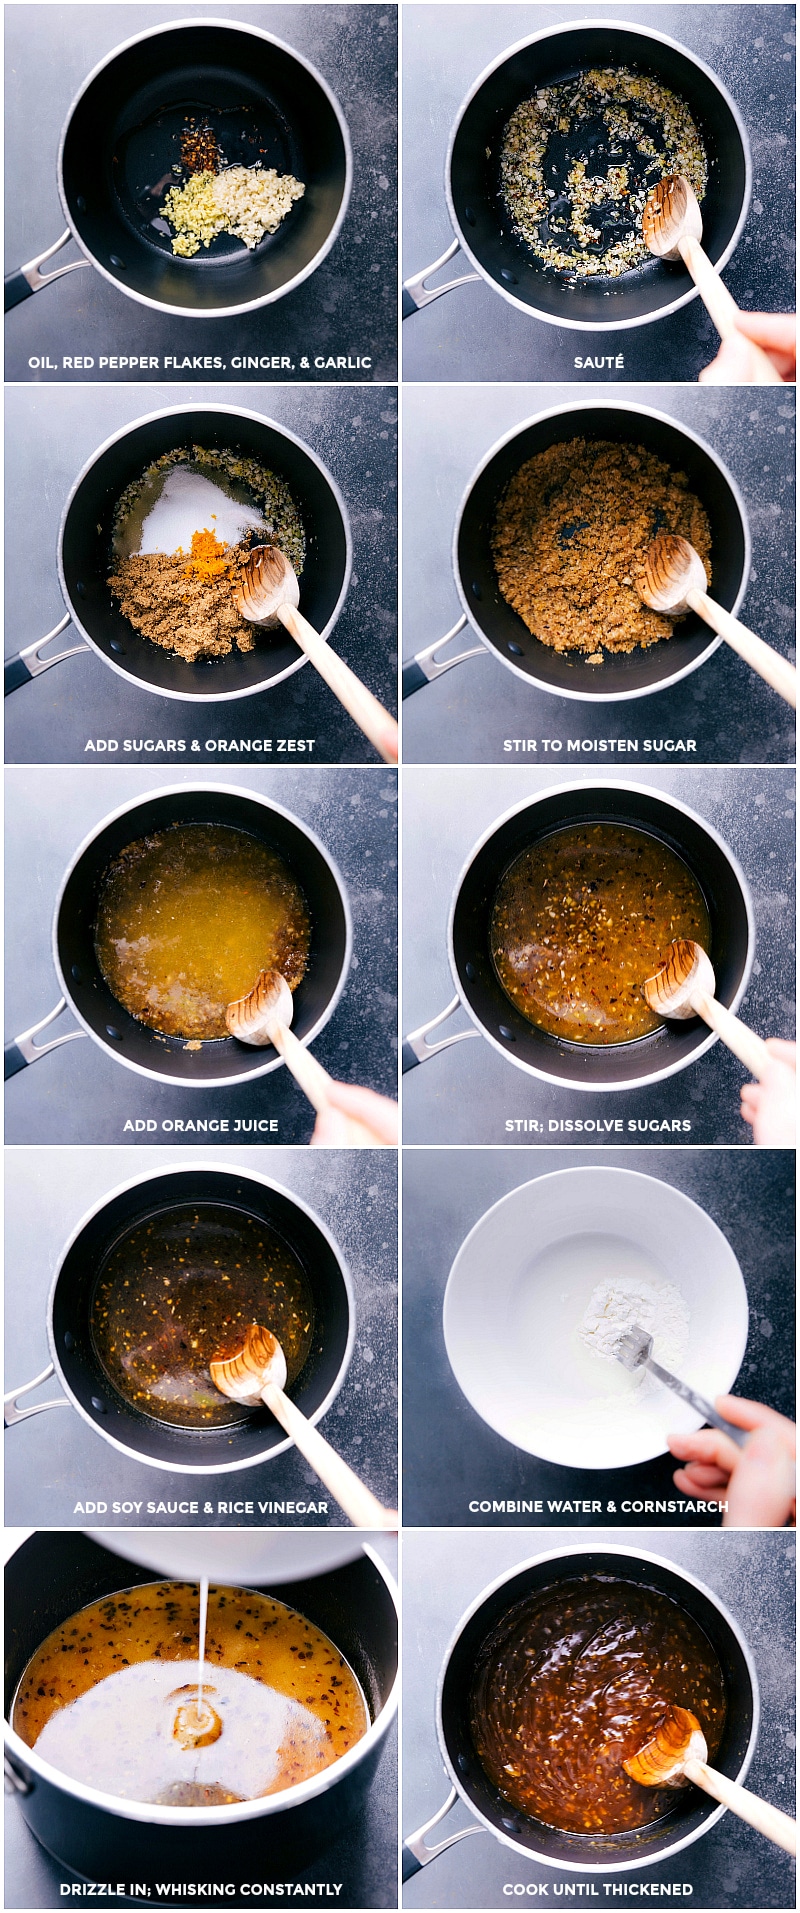 Process shots: steps for making the orange sauce.